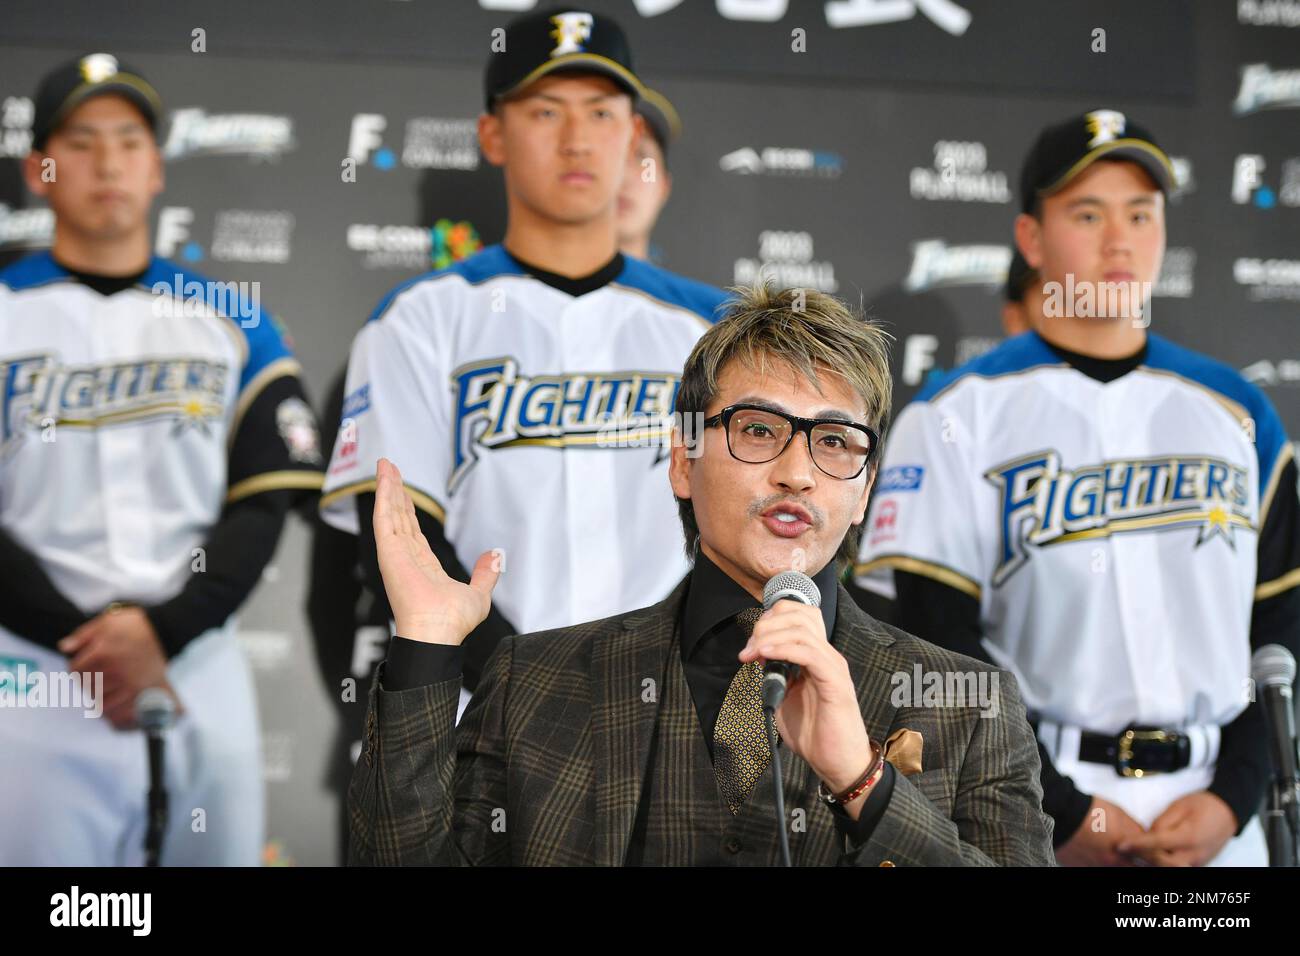 MLB Life on X: Japanese baseball team Hokkaido Nippon-Ham Fighters' new  uniforms are FIRE They were designed by the team's manager and former MLB  player Tsuyoshi Shinjo, who previously played for the